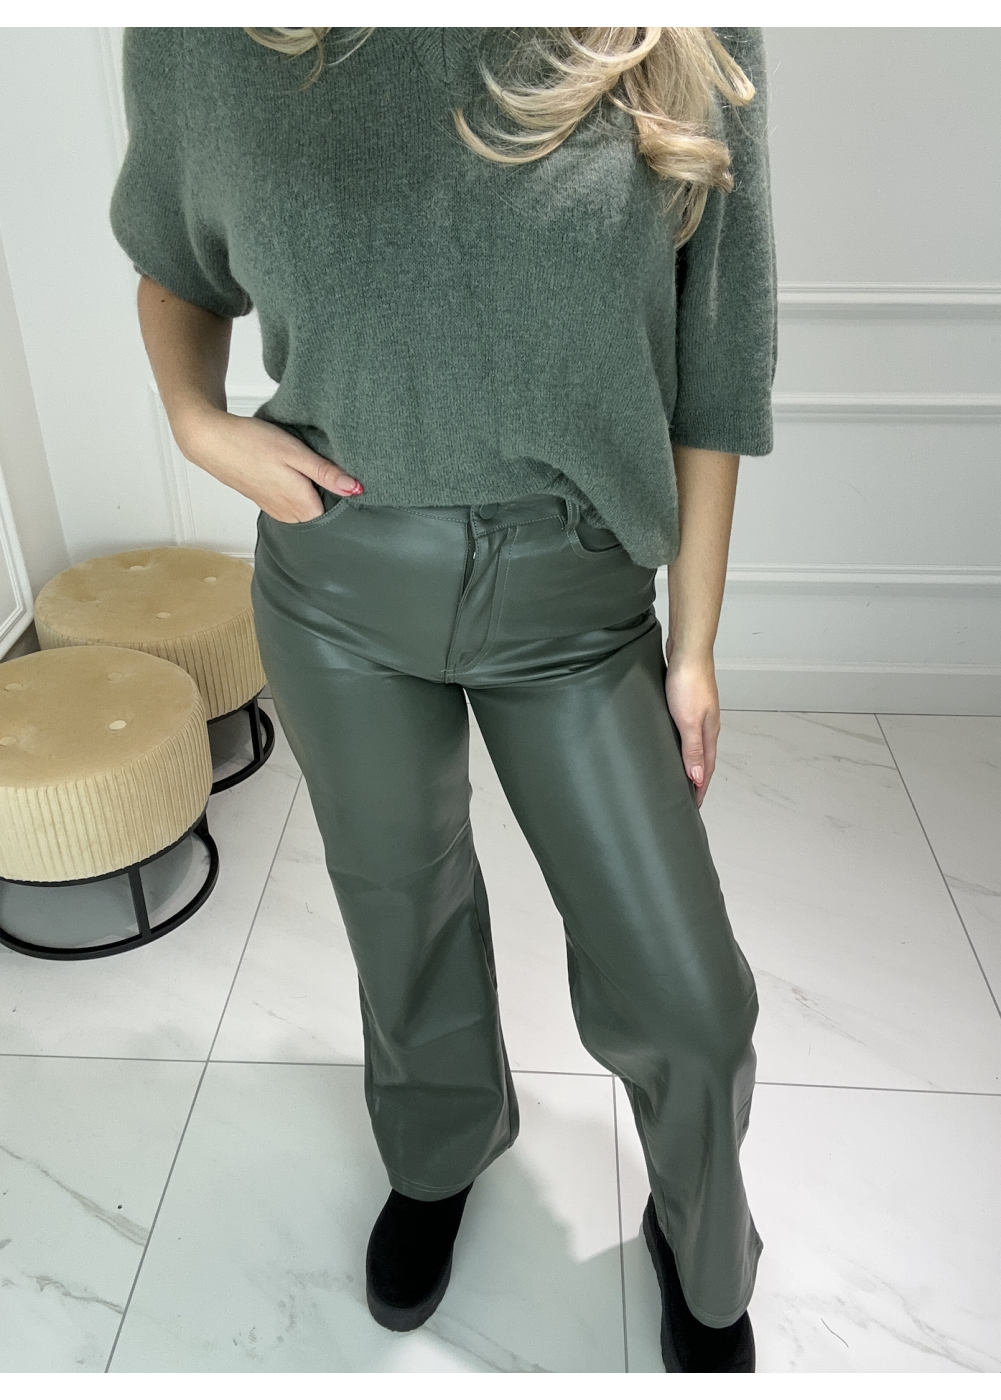 You Bet On It Leather Pants Army 8351-3 Size XS